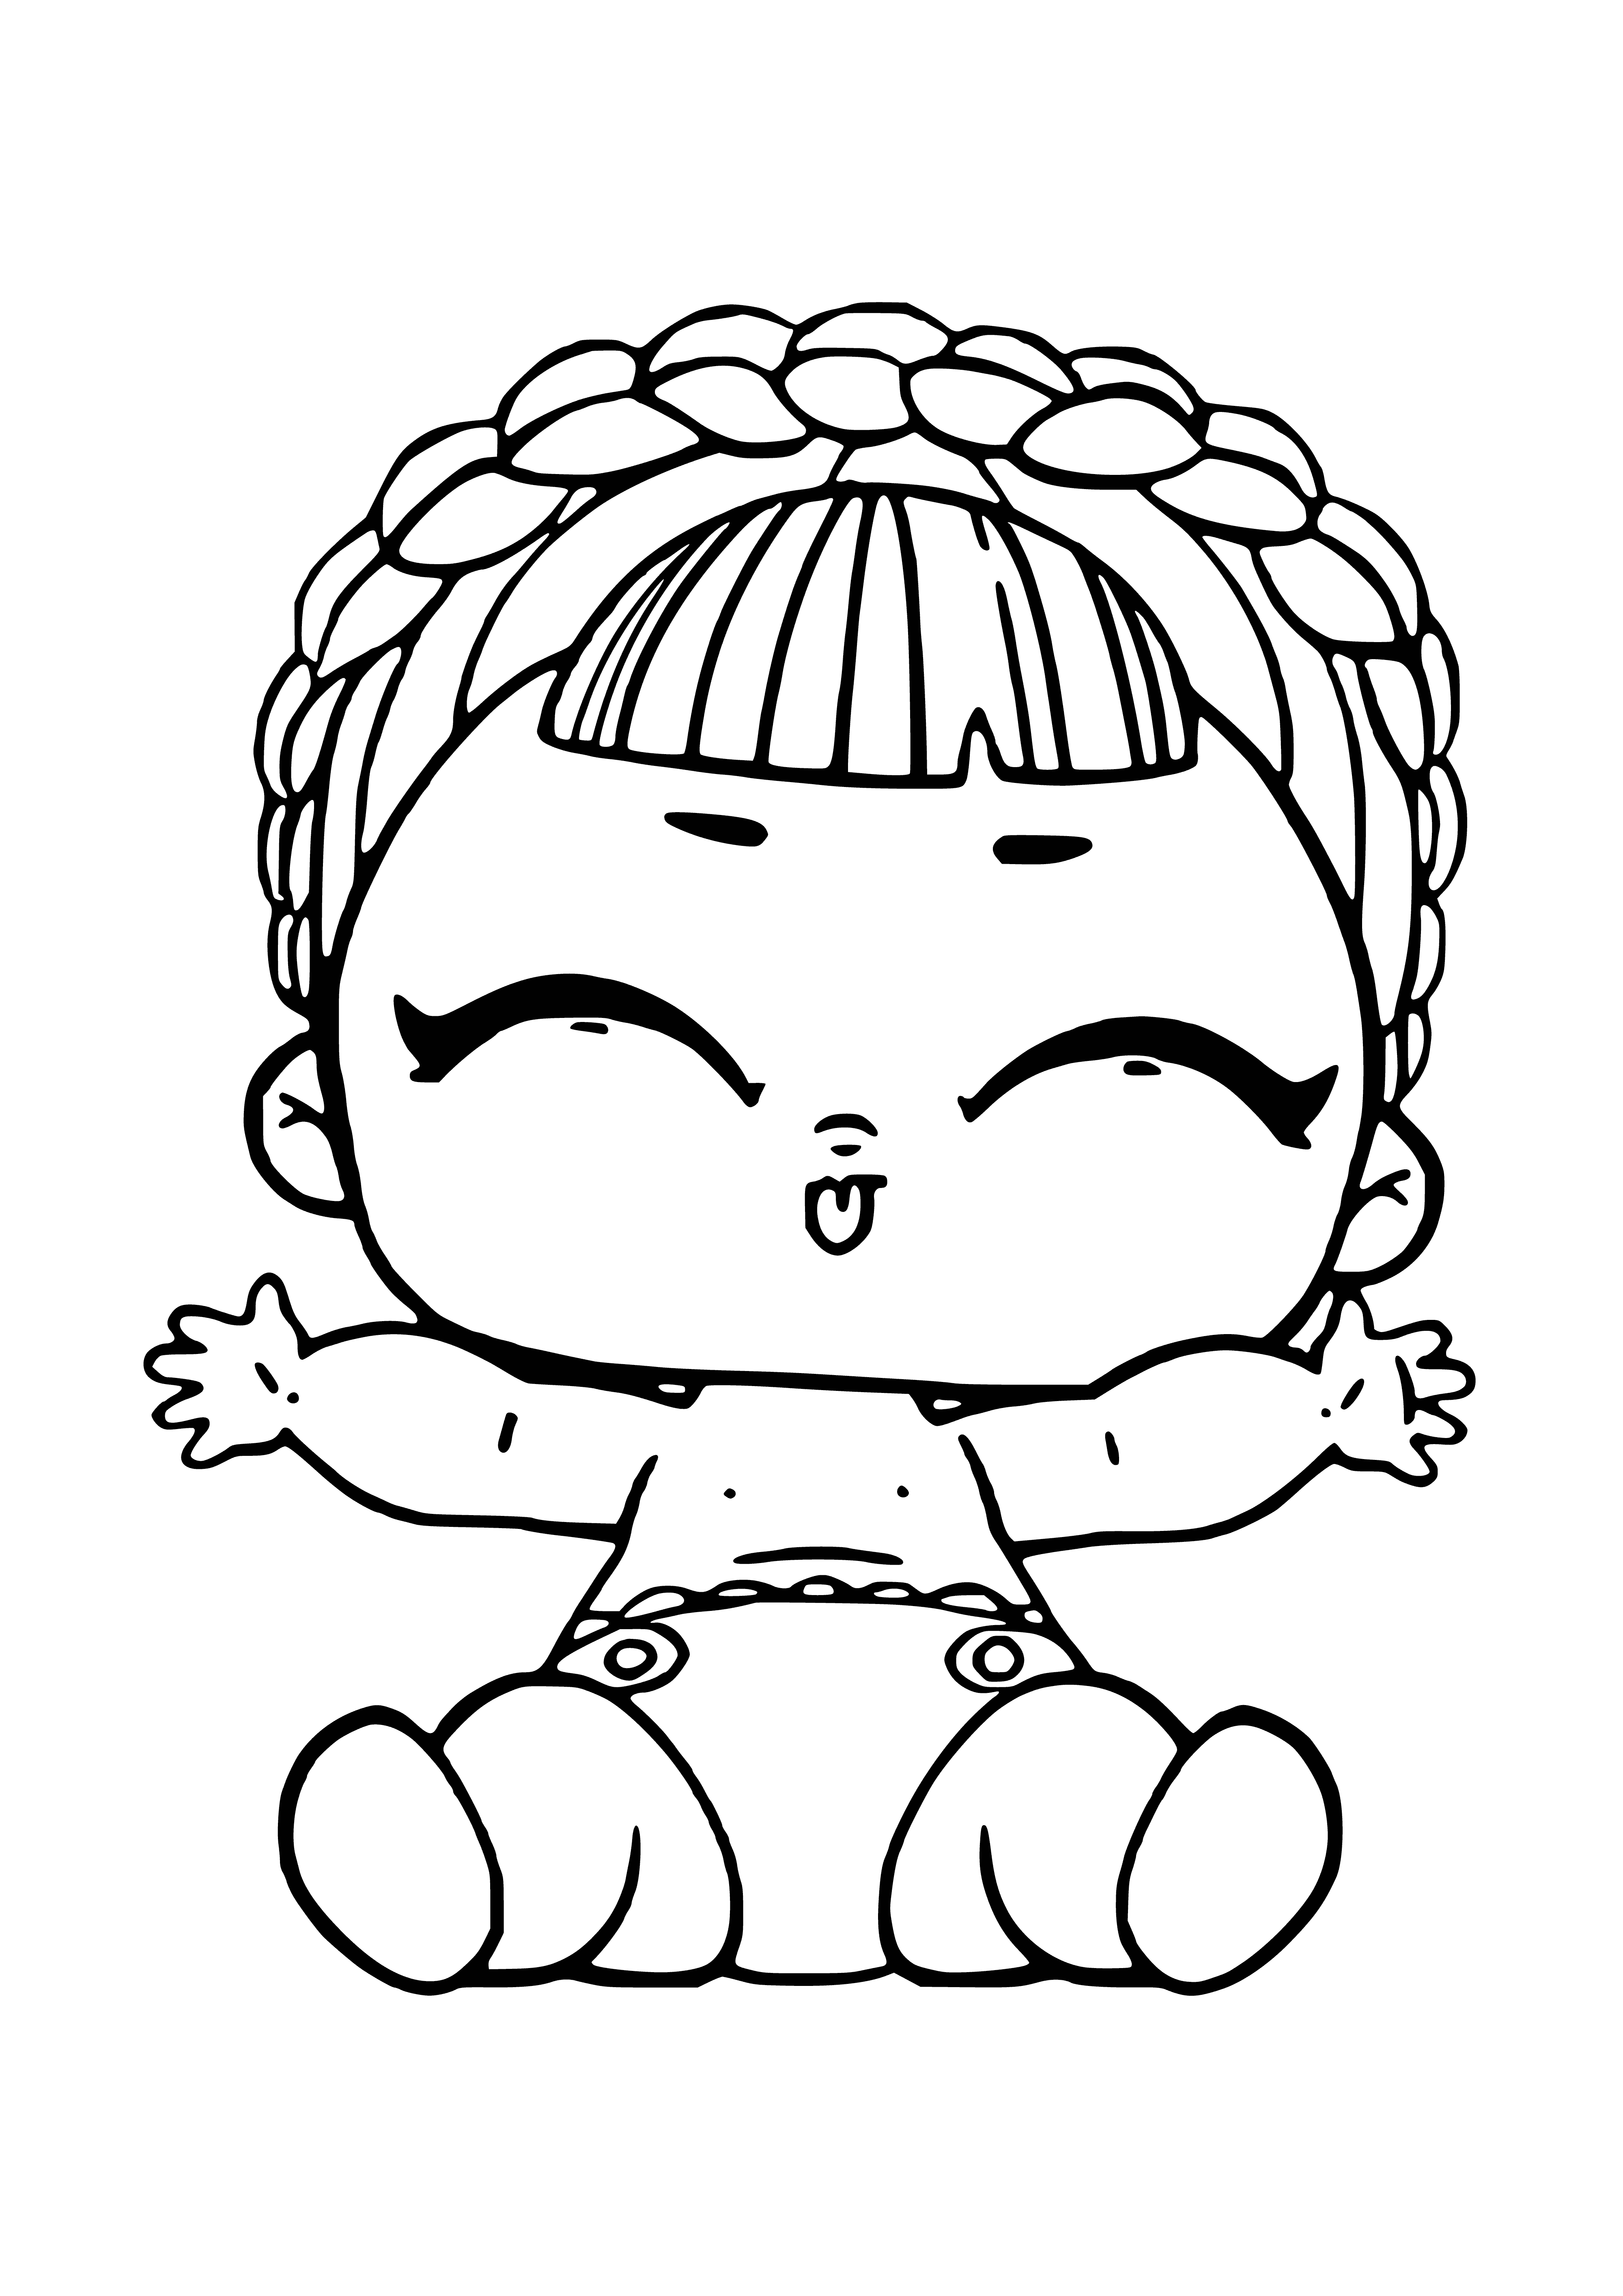 coloring page: Toy baby in pink highchair wearing onesie with "LOL" on it. Plate in front reads "LOL baby" in black letters.